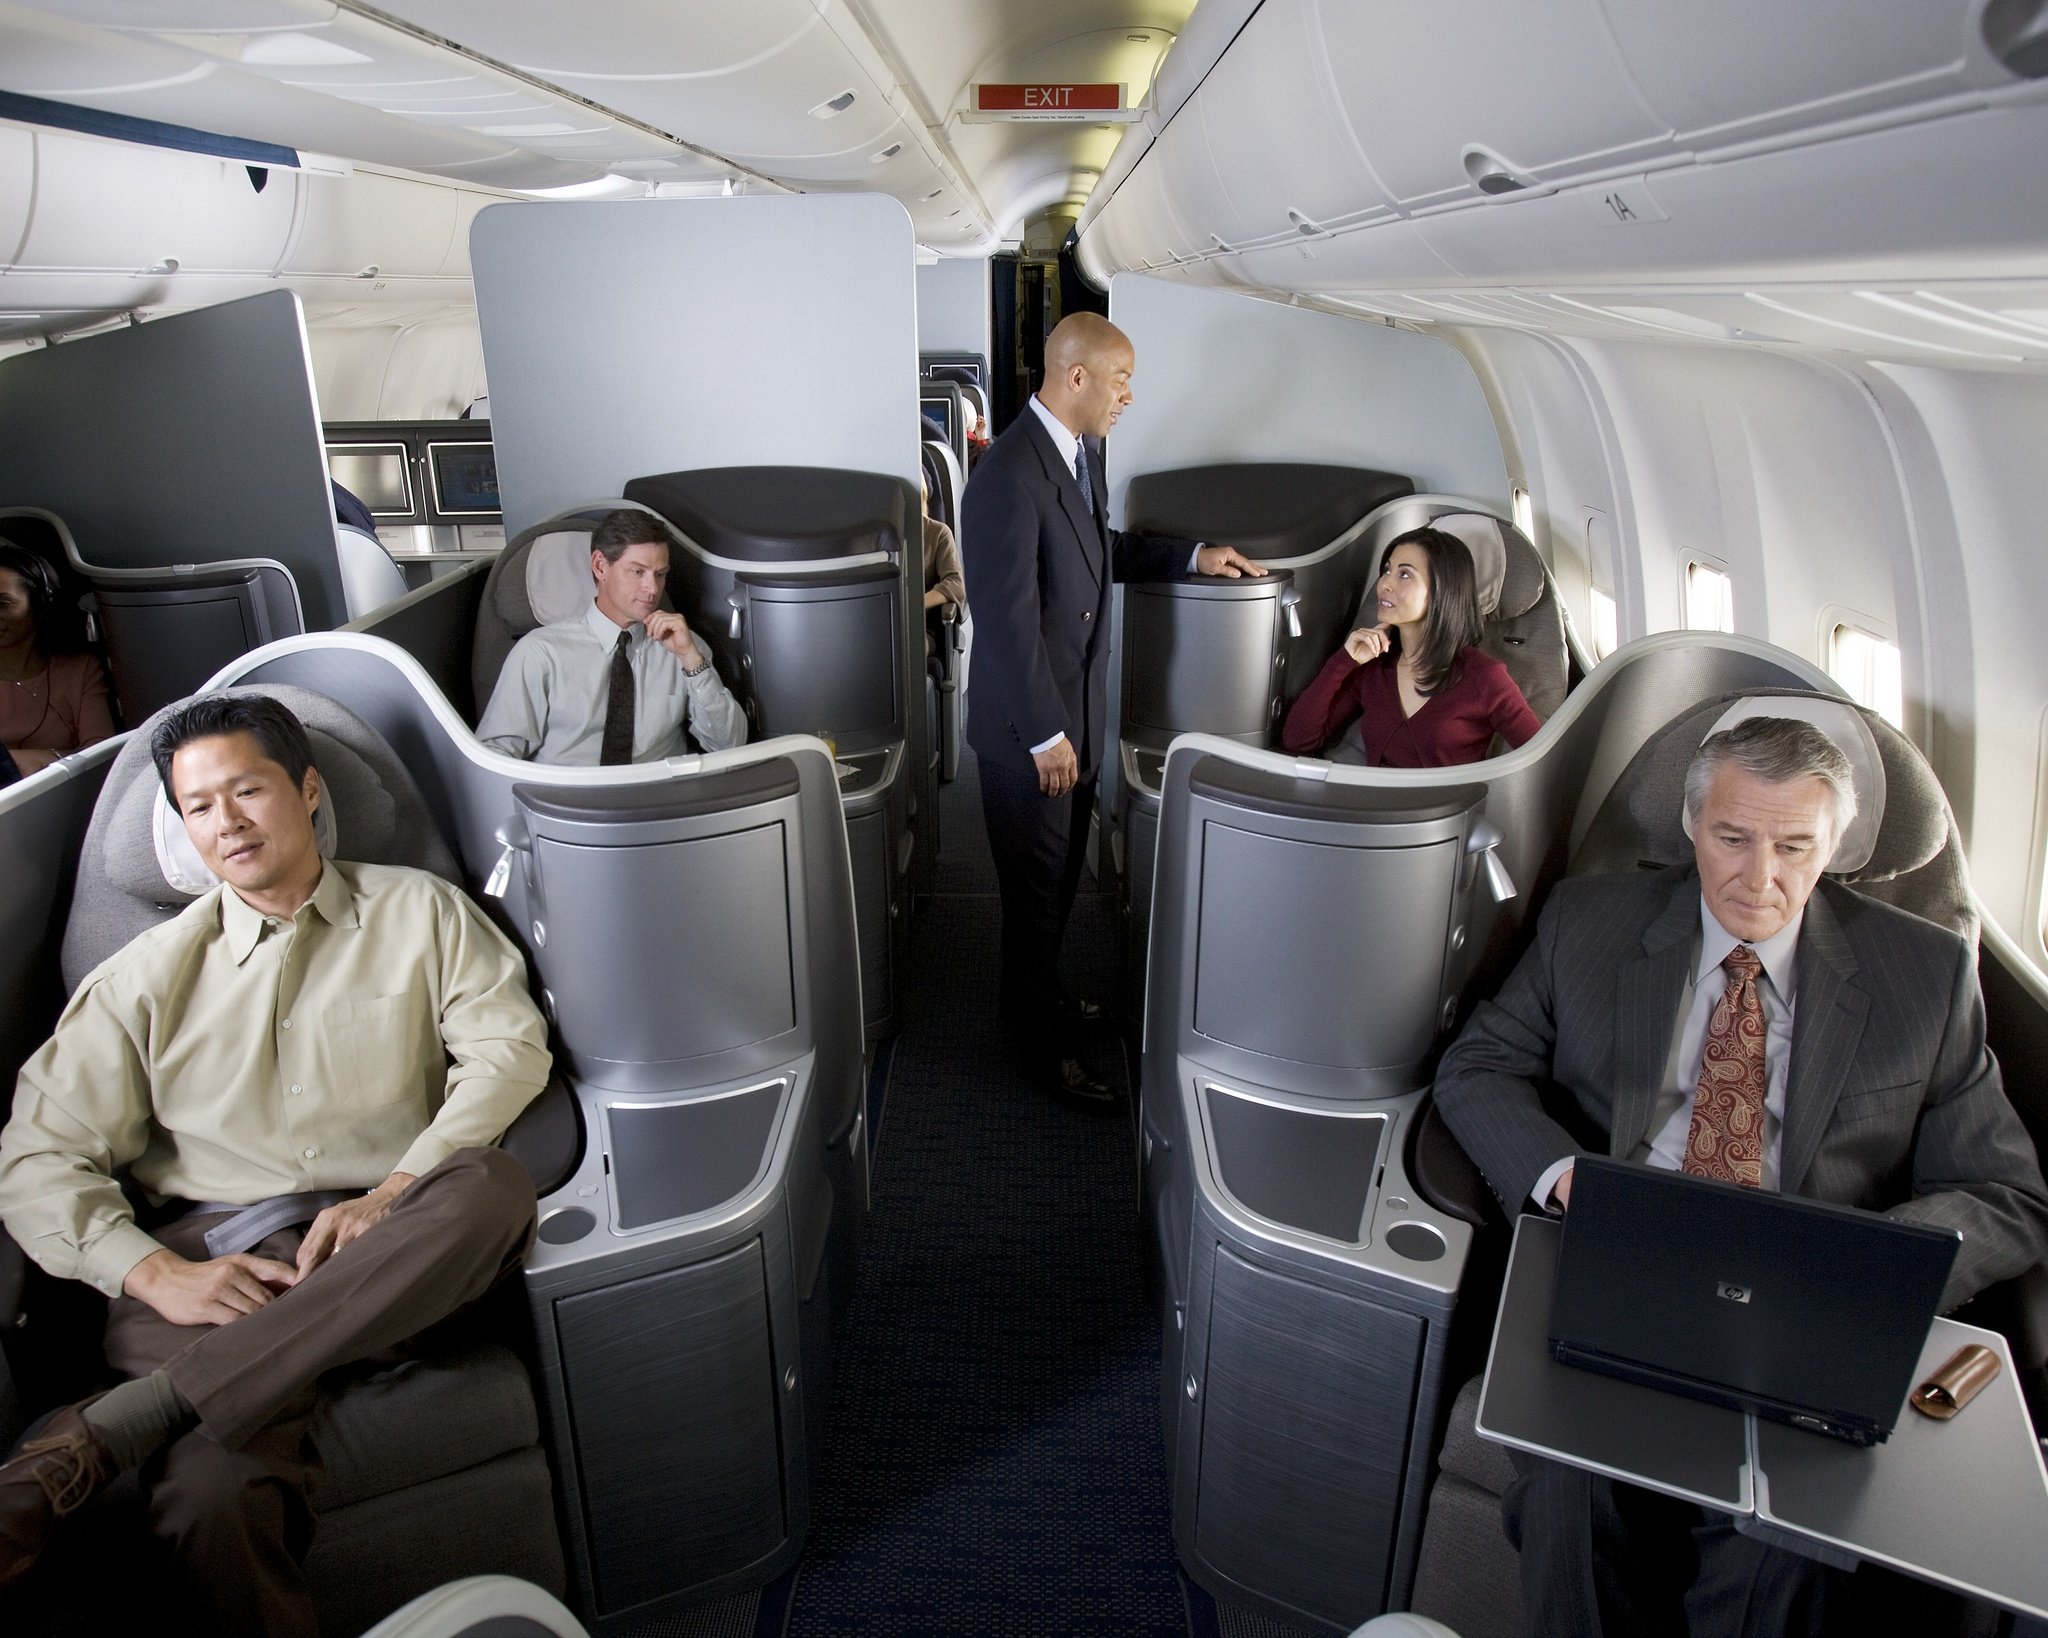 Frequent Business Travel Can Be Harmful, Here’s Why